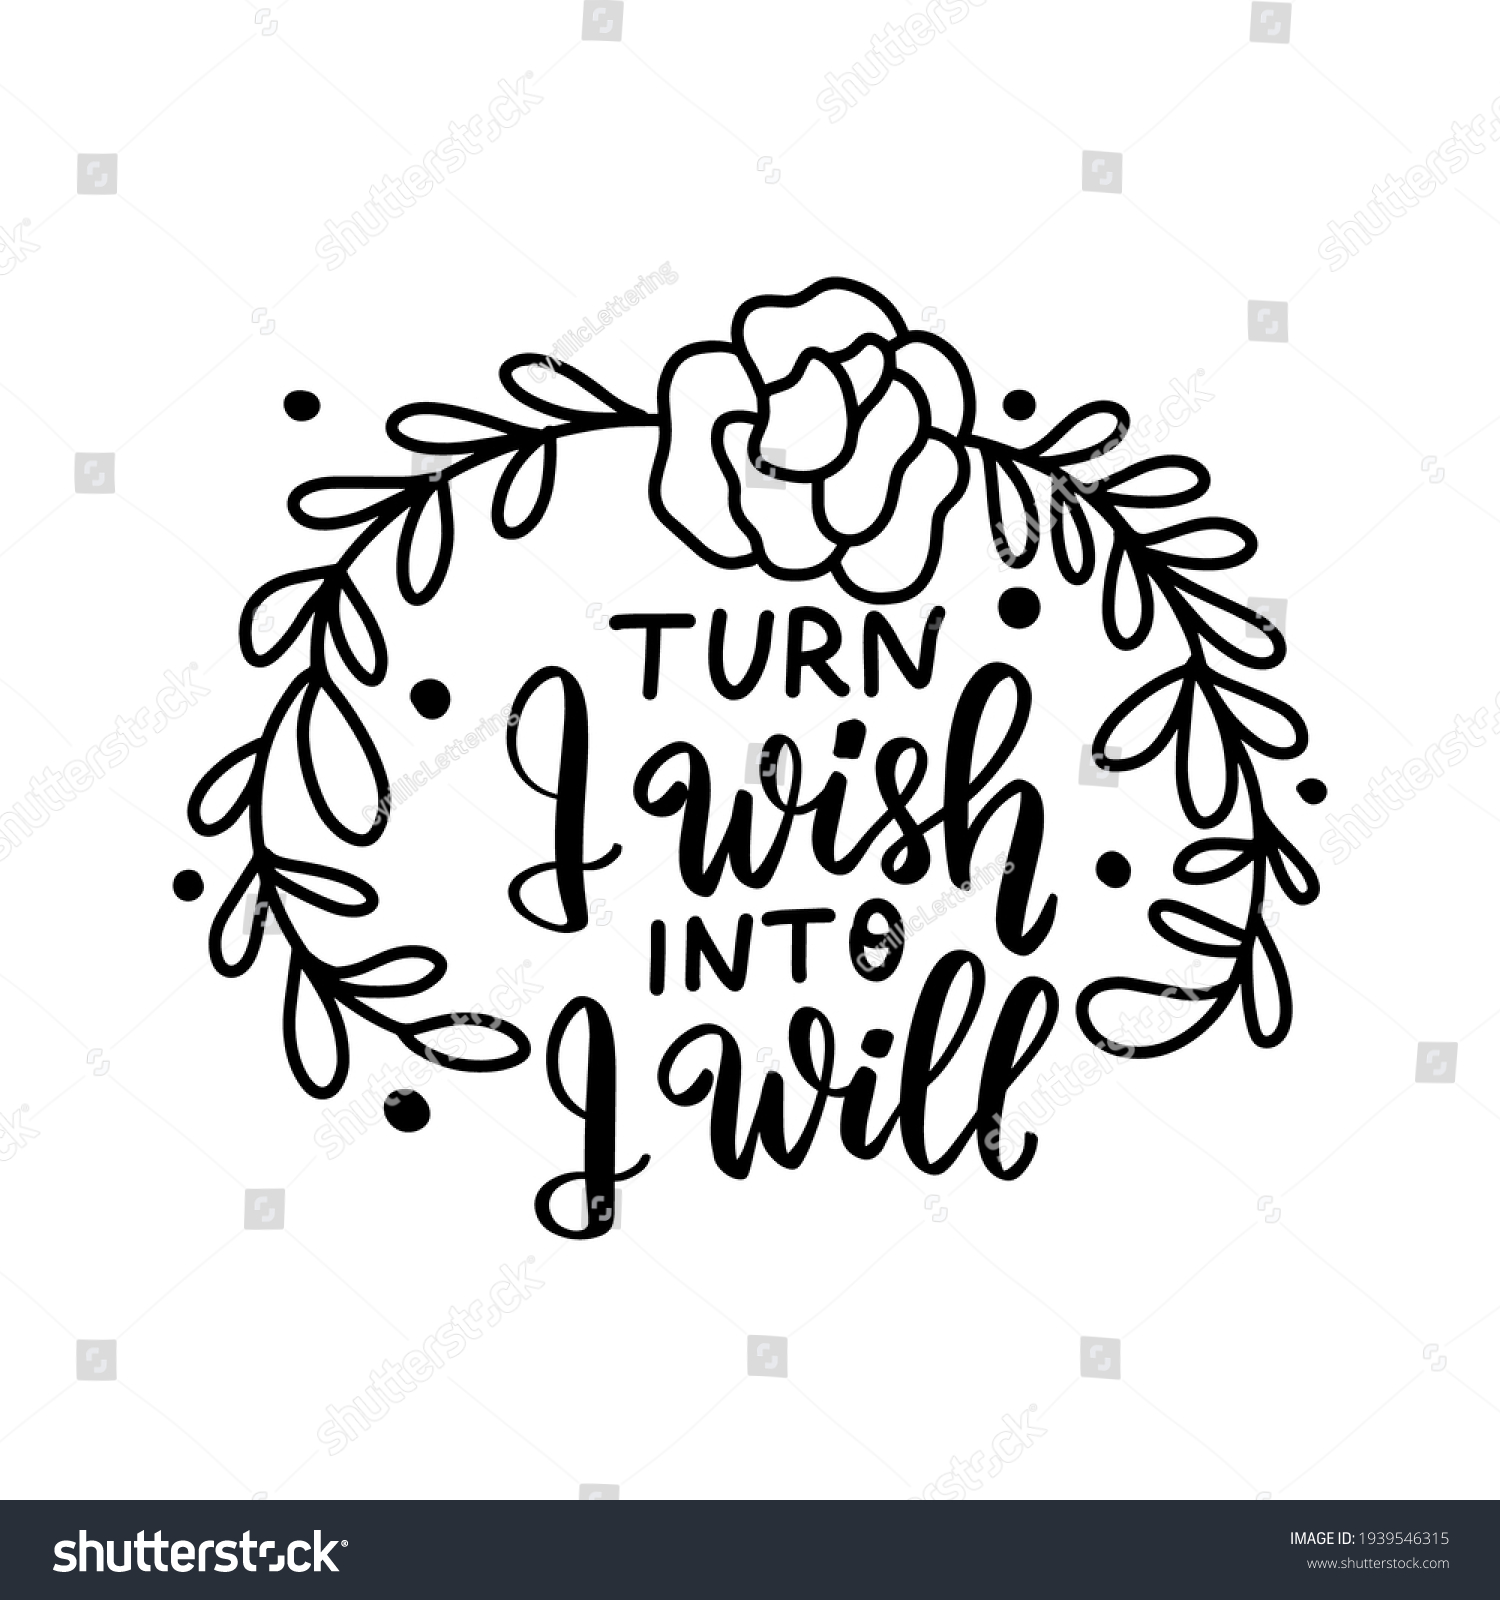 SVG of Turn I wish into I will. Hand lettering boho celestial quote. Wild flowers wreathe. Gypsy rustic bohemian vector illustration for shirt design. Boho clipart.  svg